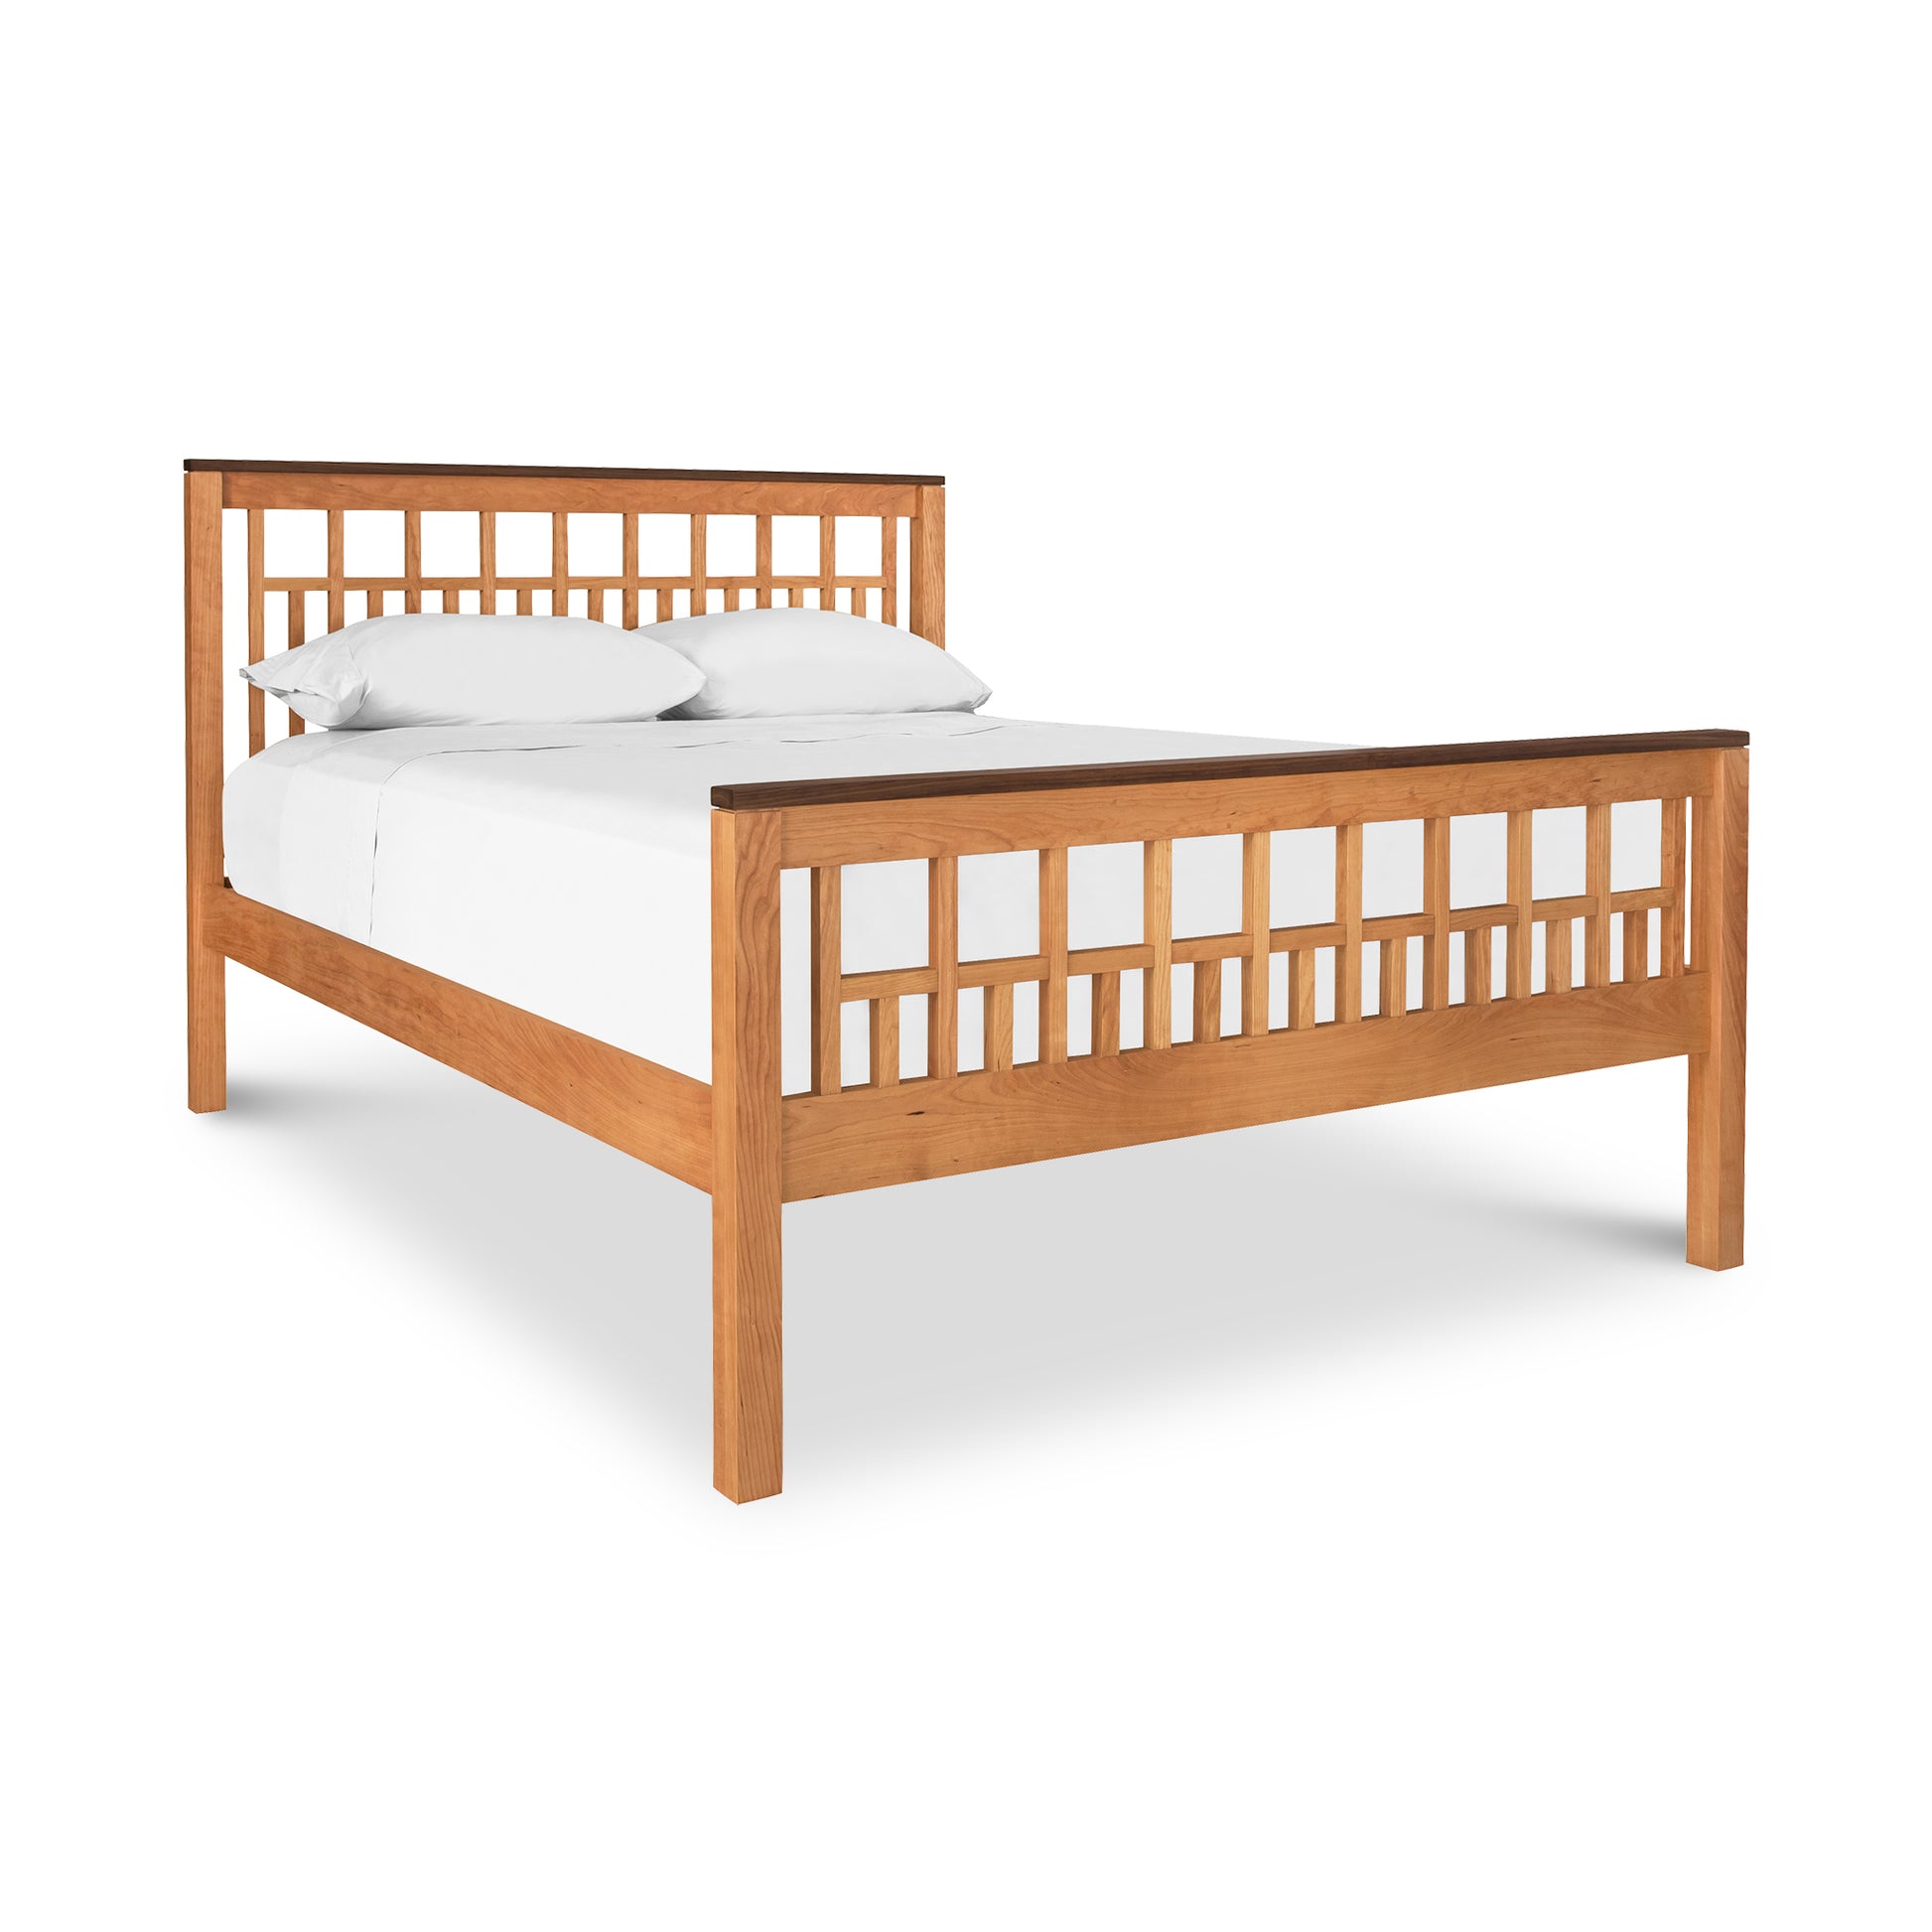 The Vermont Furniture Designs Modern American Trellis Bed features a high end, wooden bed frame with a stylish wooden headboard and footboard. This elegant piece of bedroom furniture adds sophistication and charm to any space.